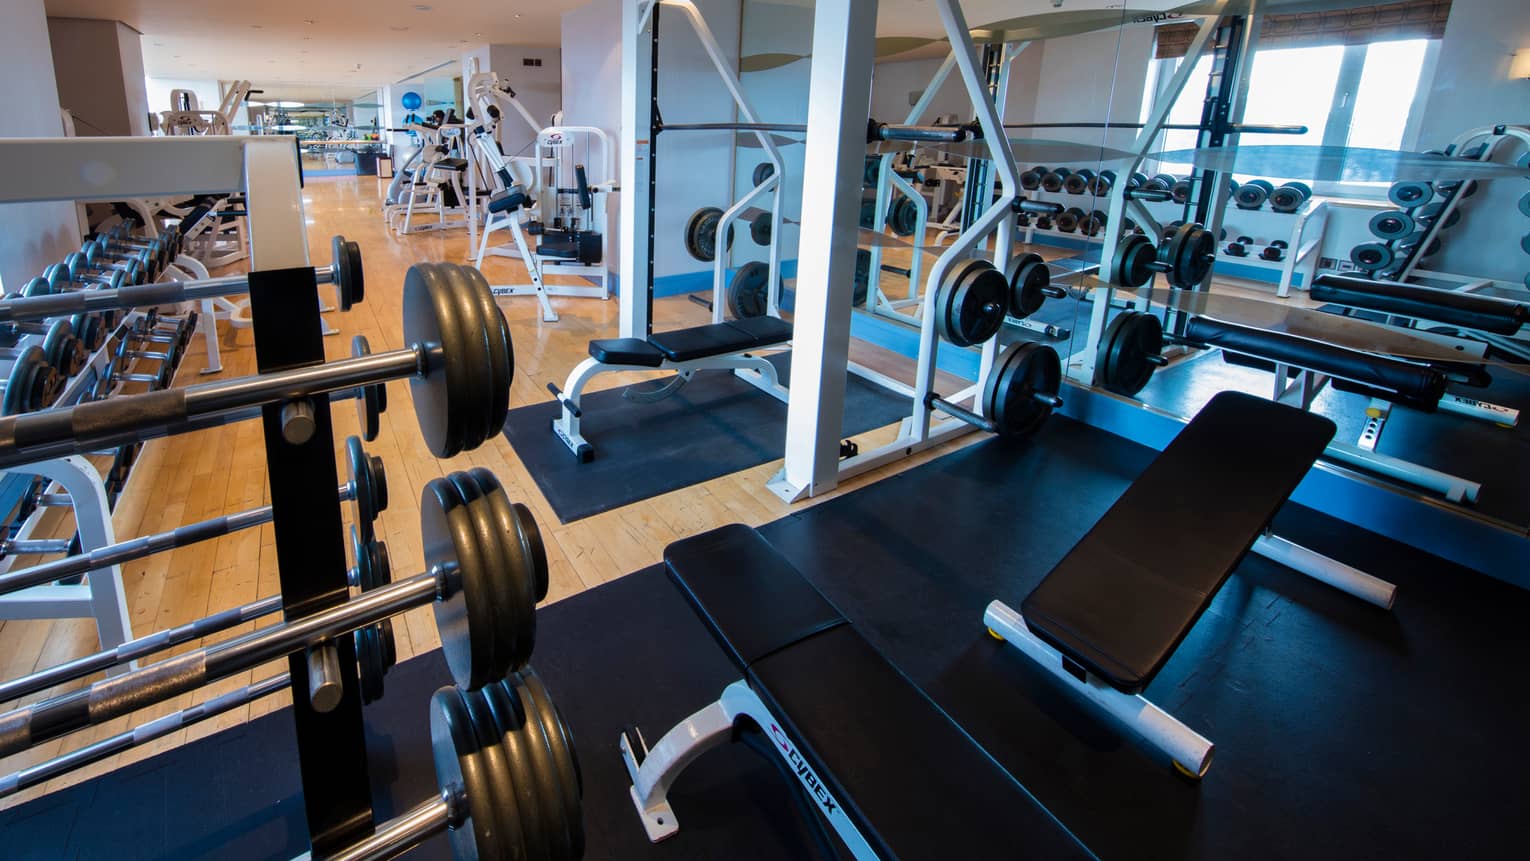 Fitness facility barbells and weight lifting machines, with cardio machines and mirrors on lower level